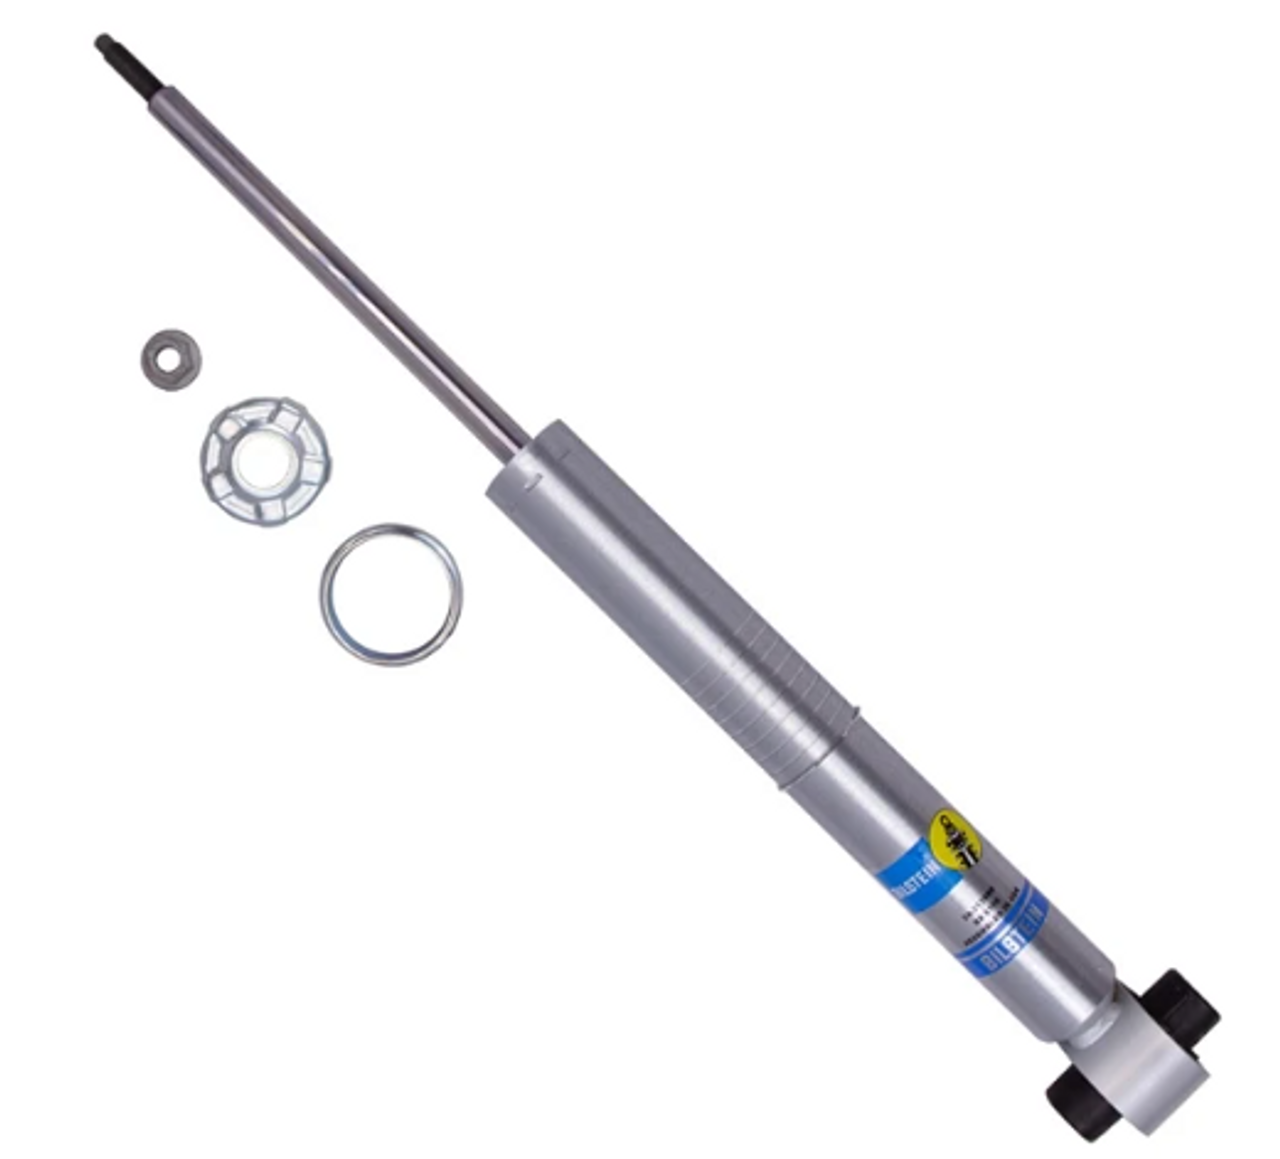 Bilstein 24-313988 B8 5100 Ride Height Adjustable Rear Shock Absorber for Ford Bronco 2021+